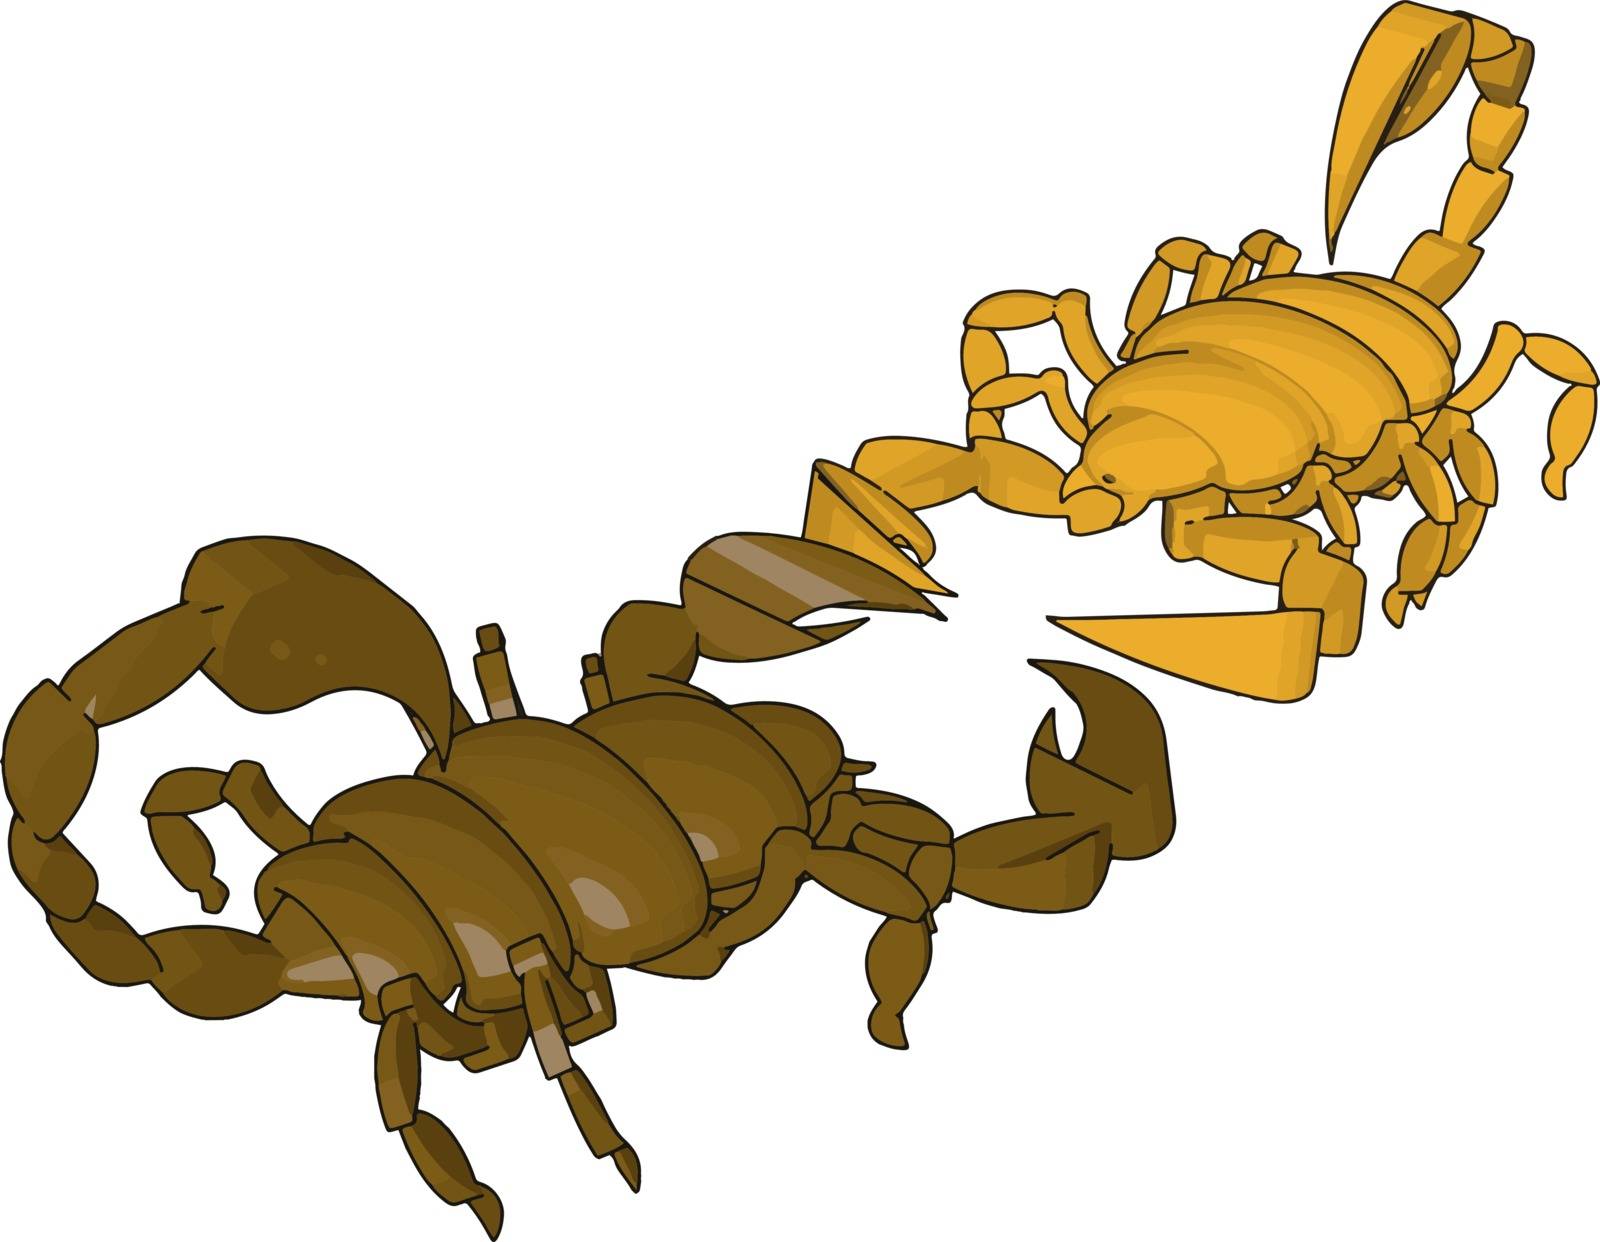 Mode of a 3d scorpion, illustration, vector on white background.